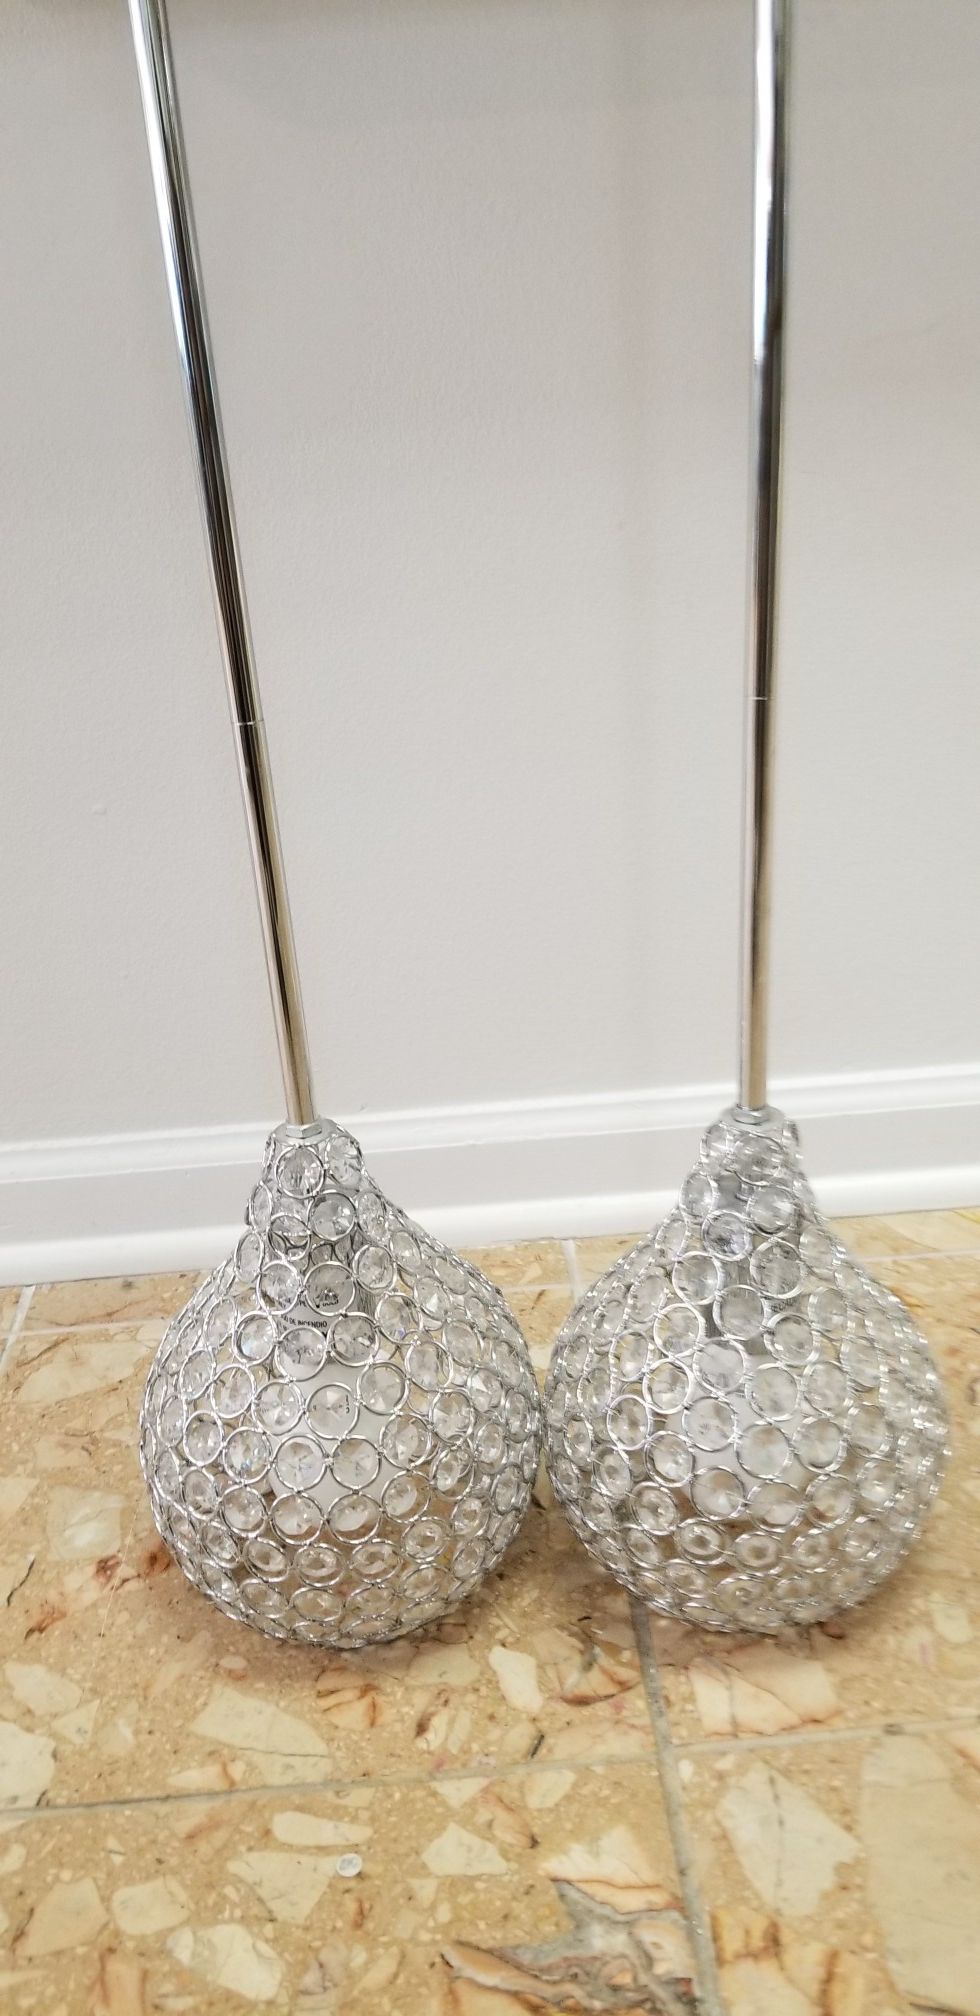 Brand new Lamps